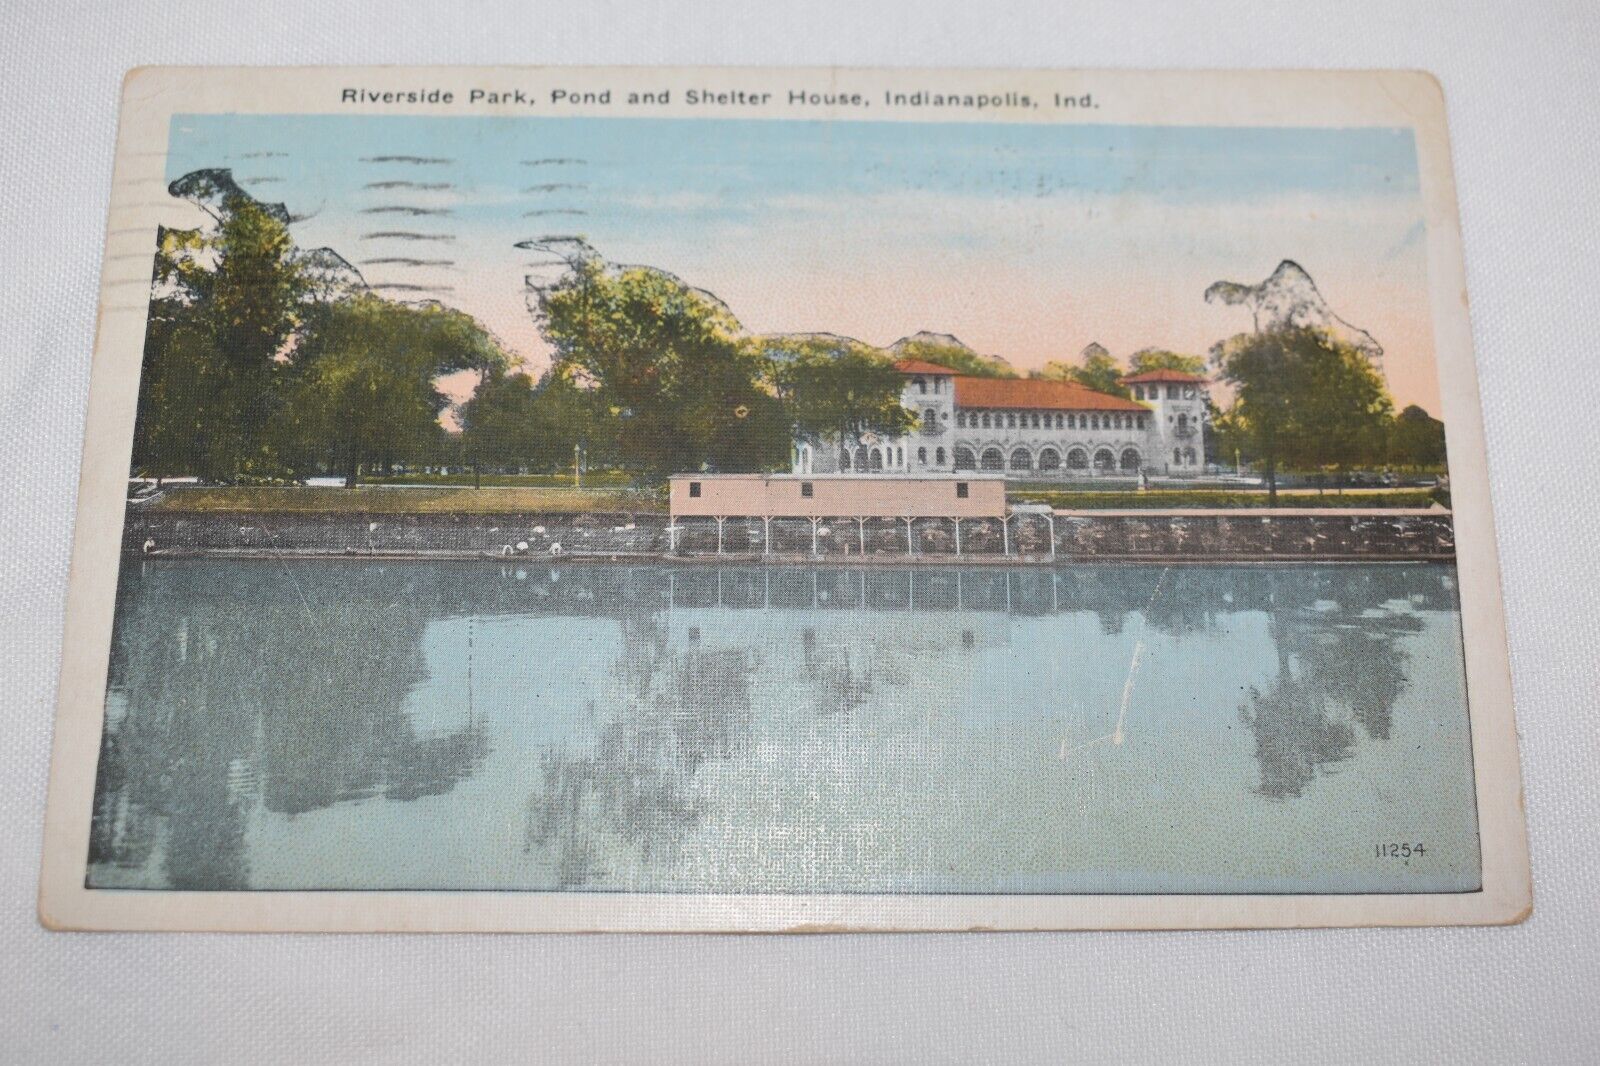 Riverside Park Pond and Shelter House Indianapolis Indiana Postcard 1924 Cancel